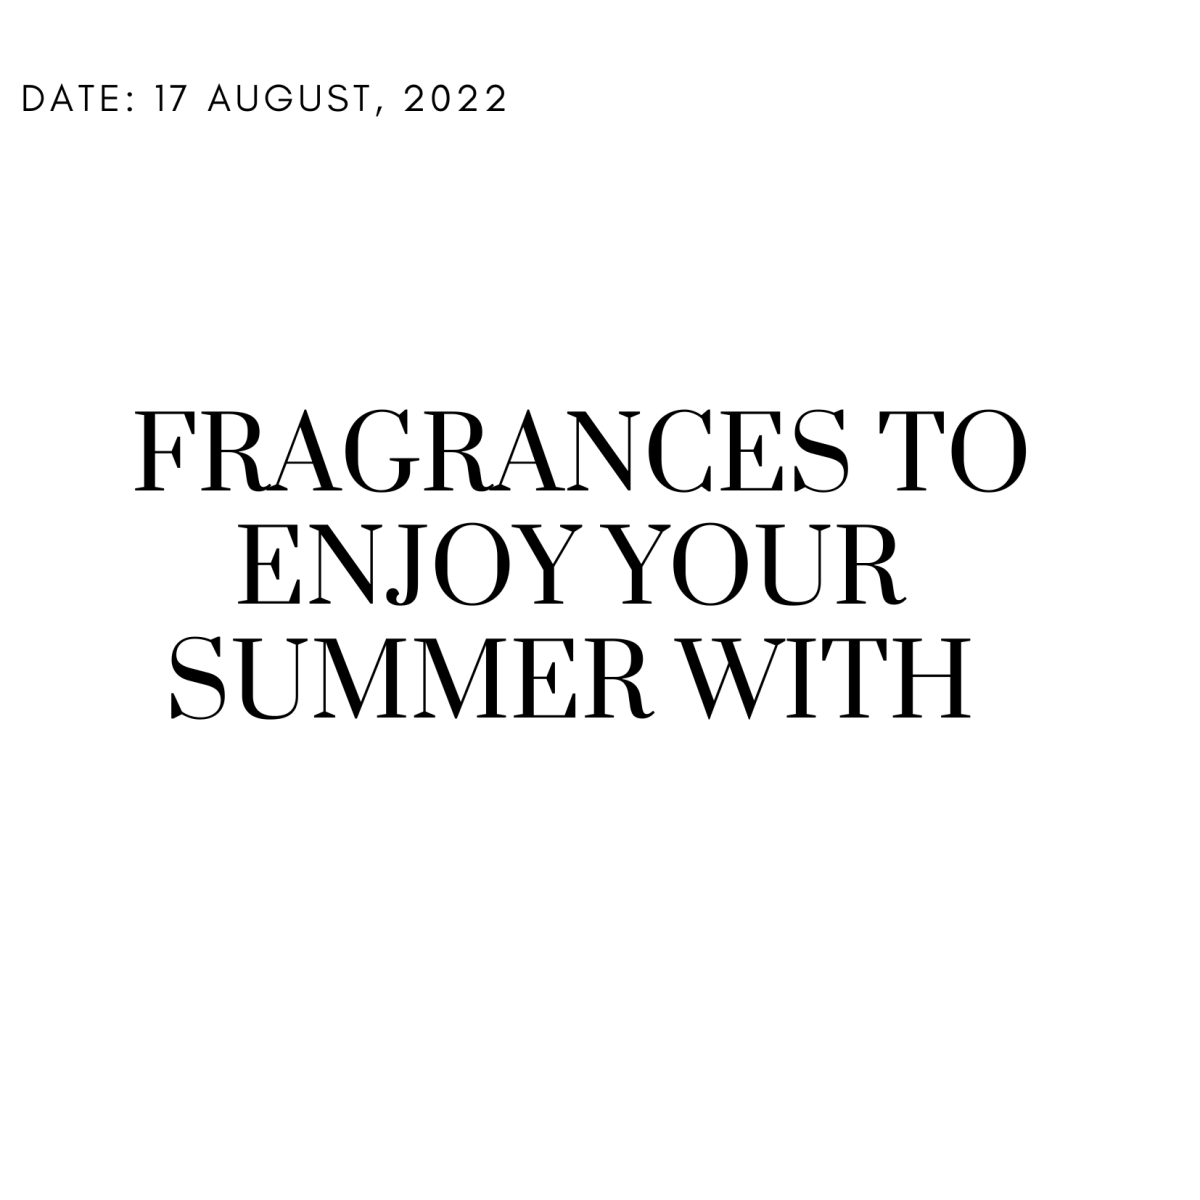 Fragrances to Enjoy your Summer With